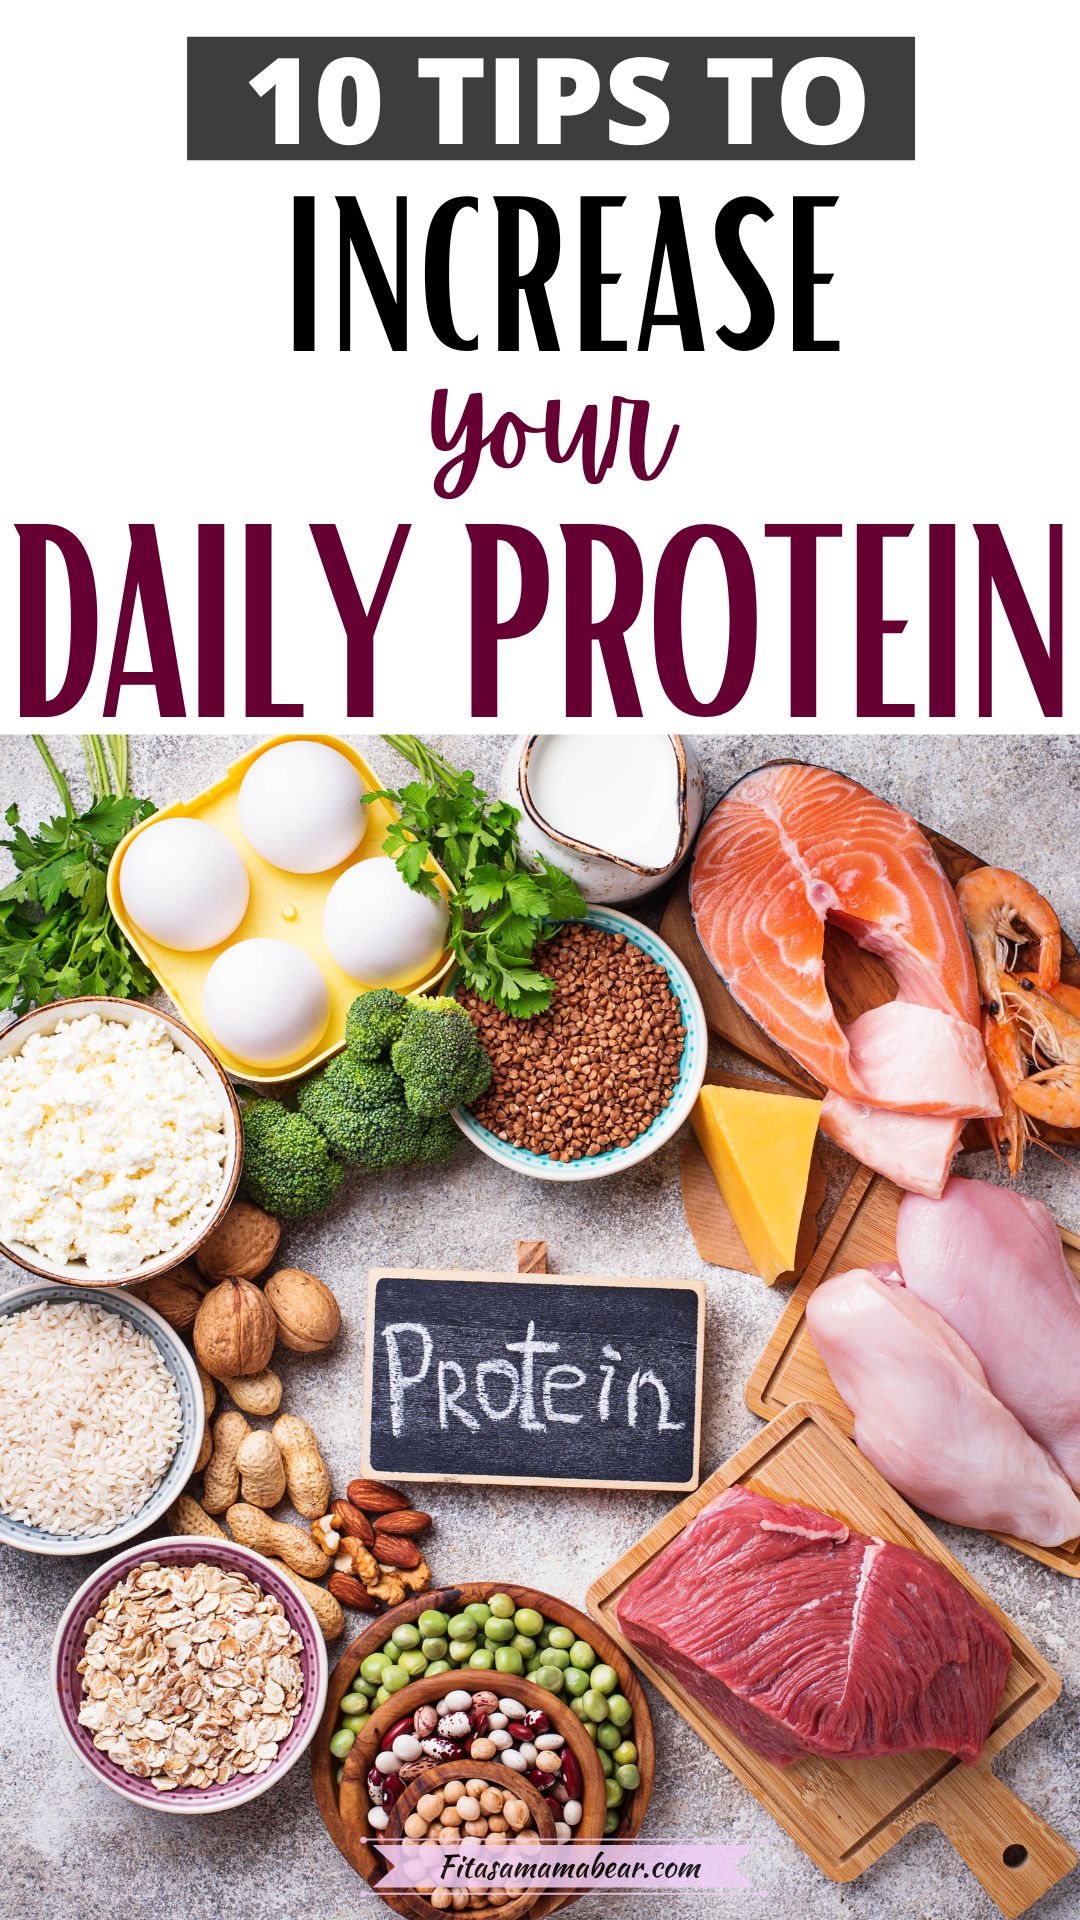 Multiple protein-rich foods like meat, cheese, nuts, and seeds around a chalkboard with the word protein on it.